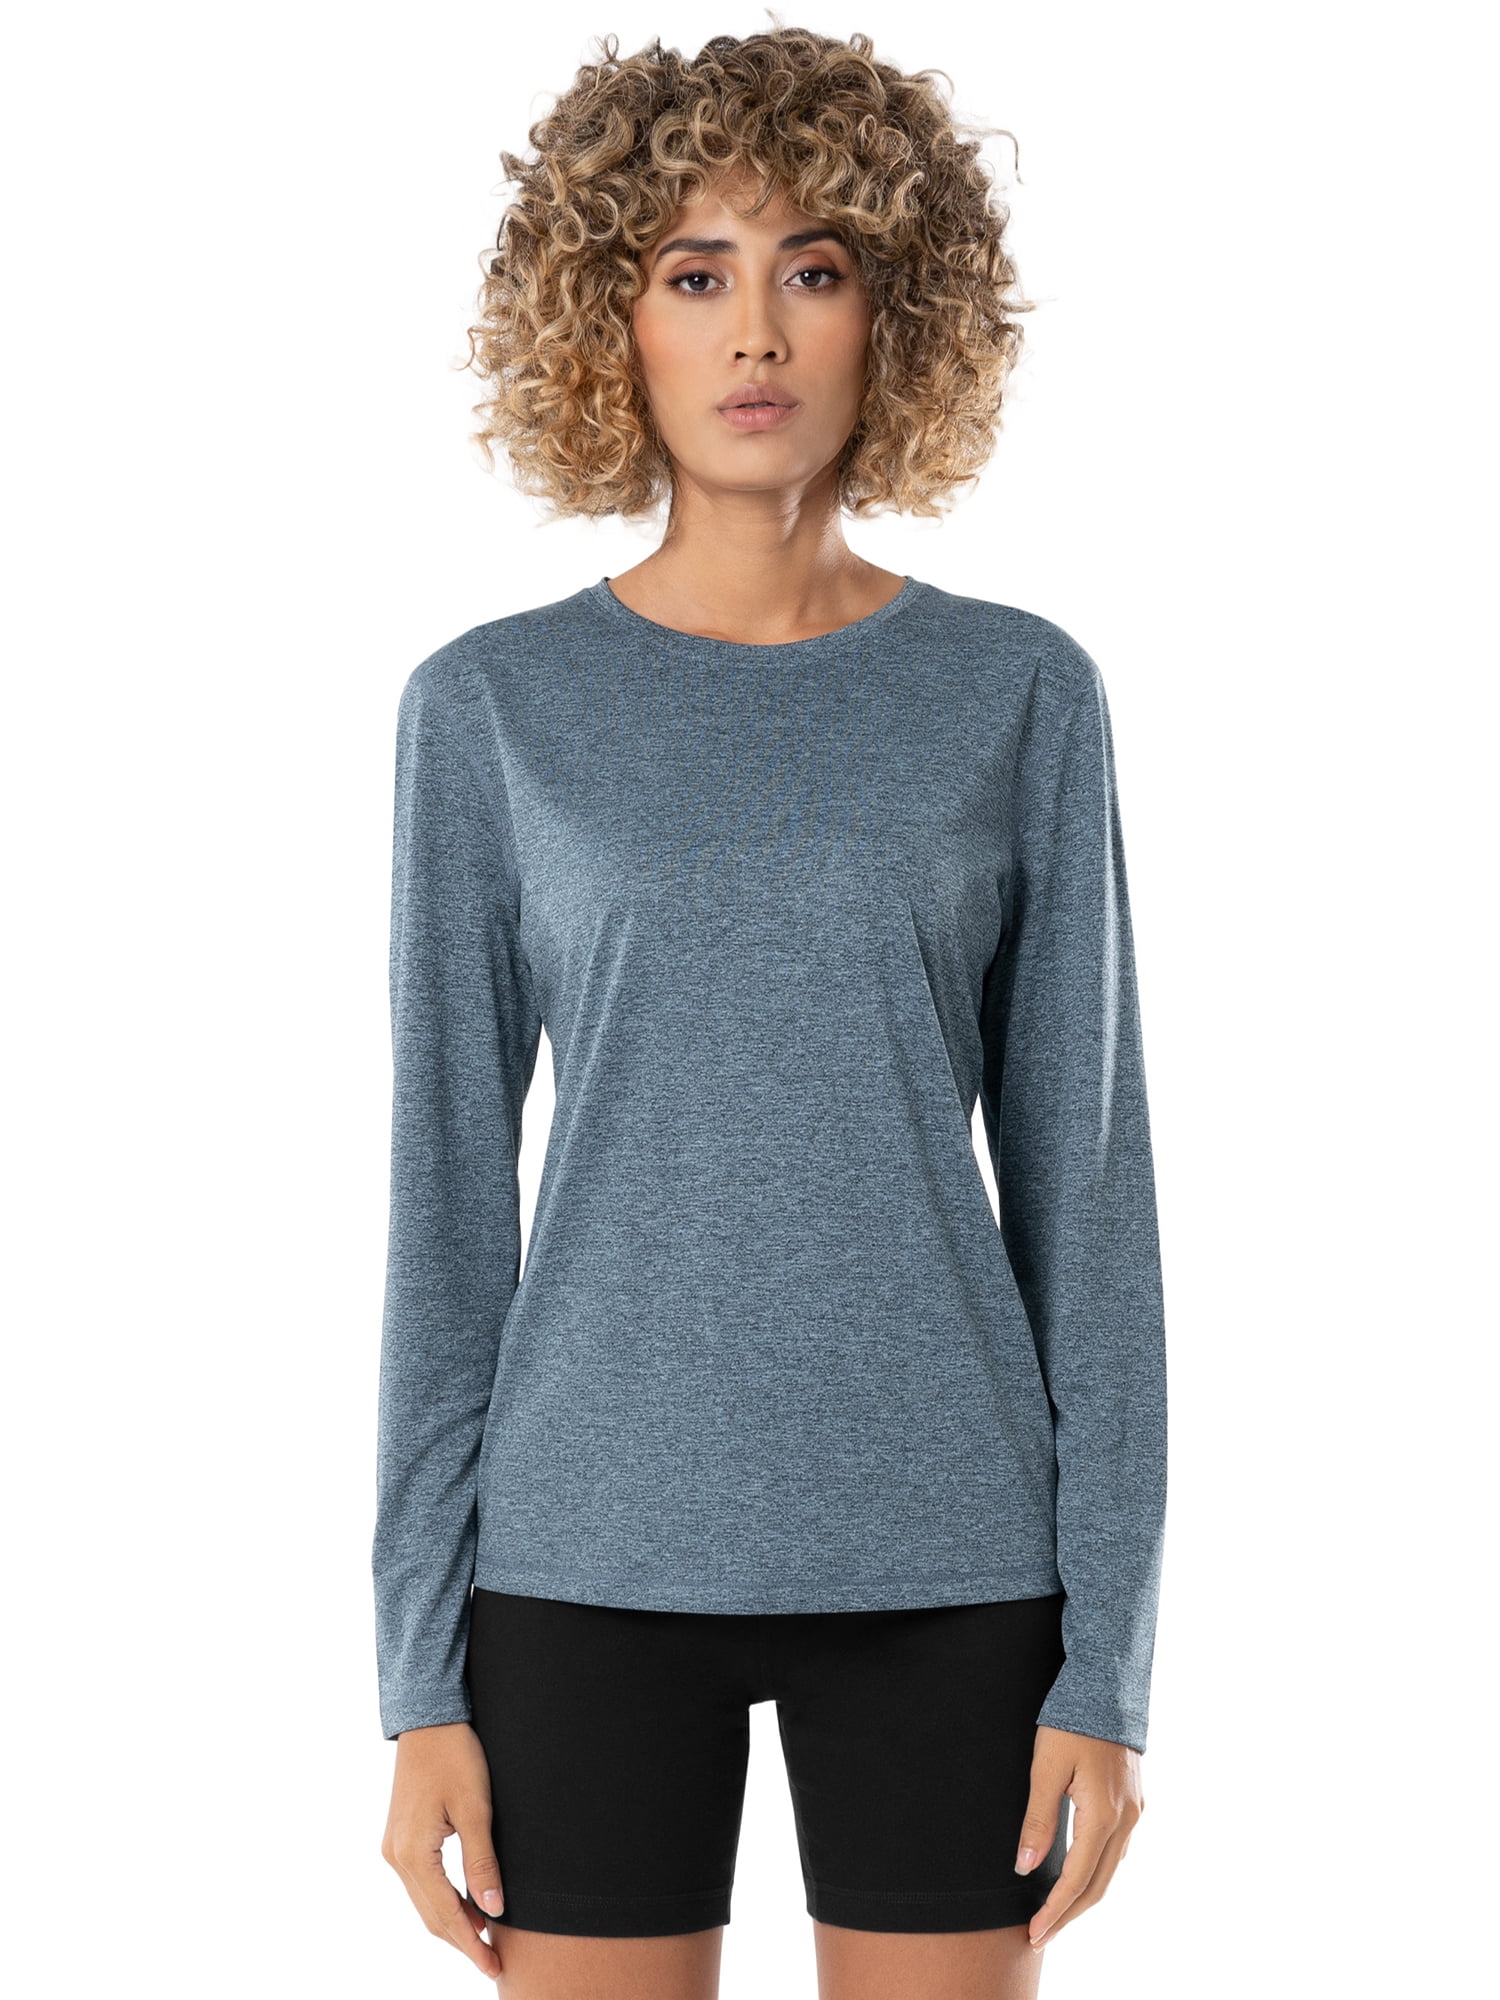 Athletic Works Women Active Moisture Wicking Long Sleeve T-Shirt, XS ...